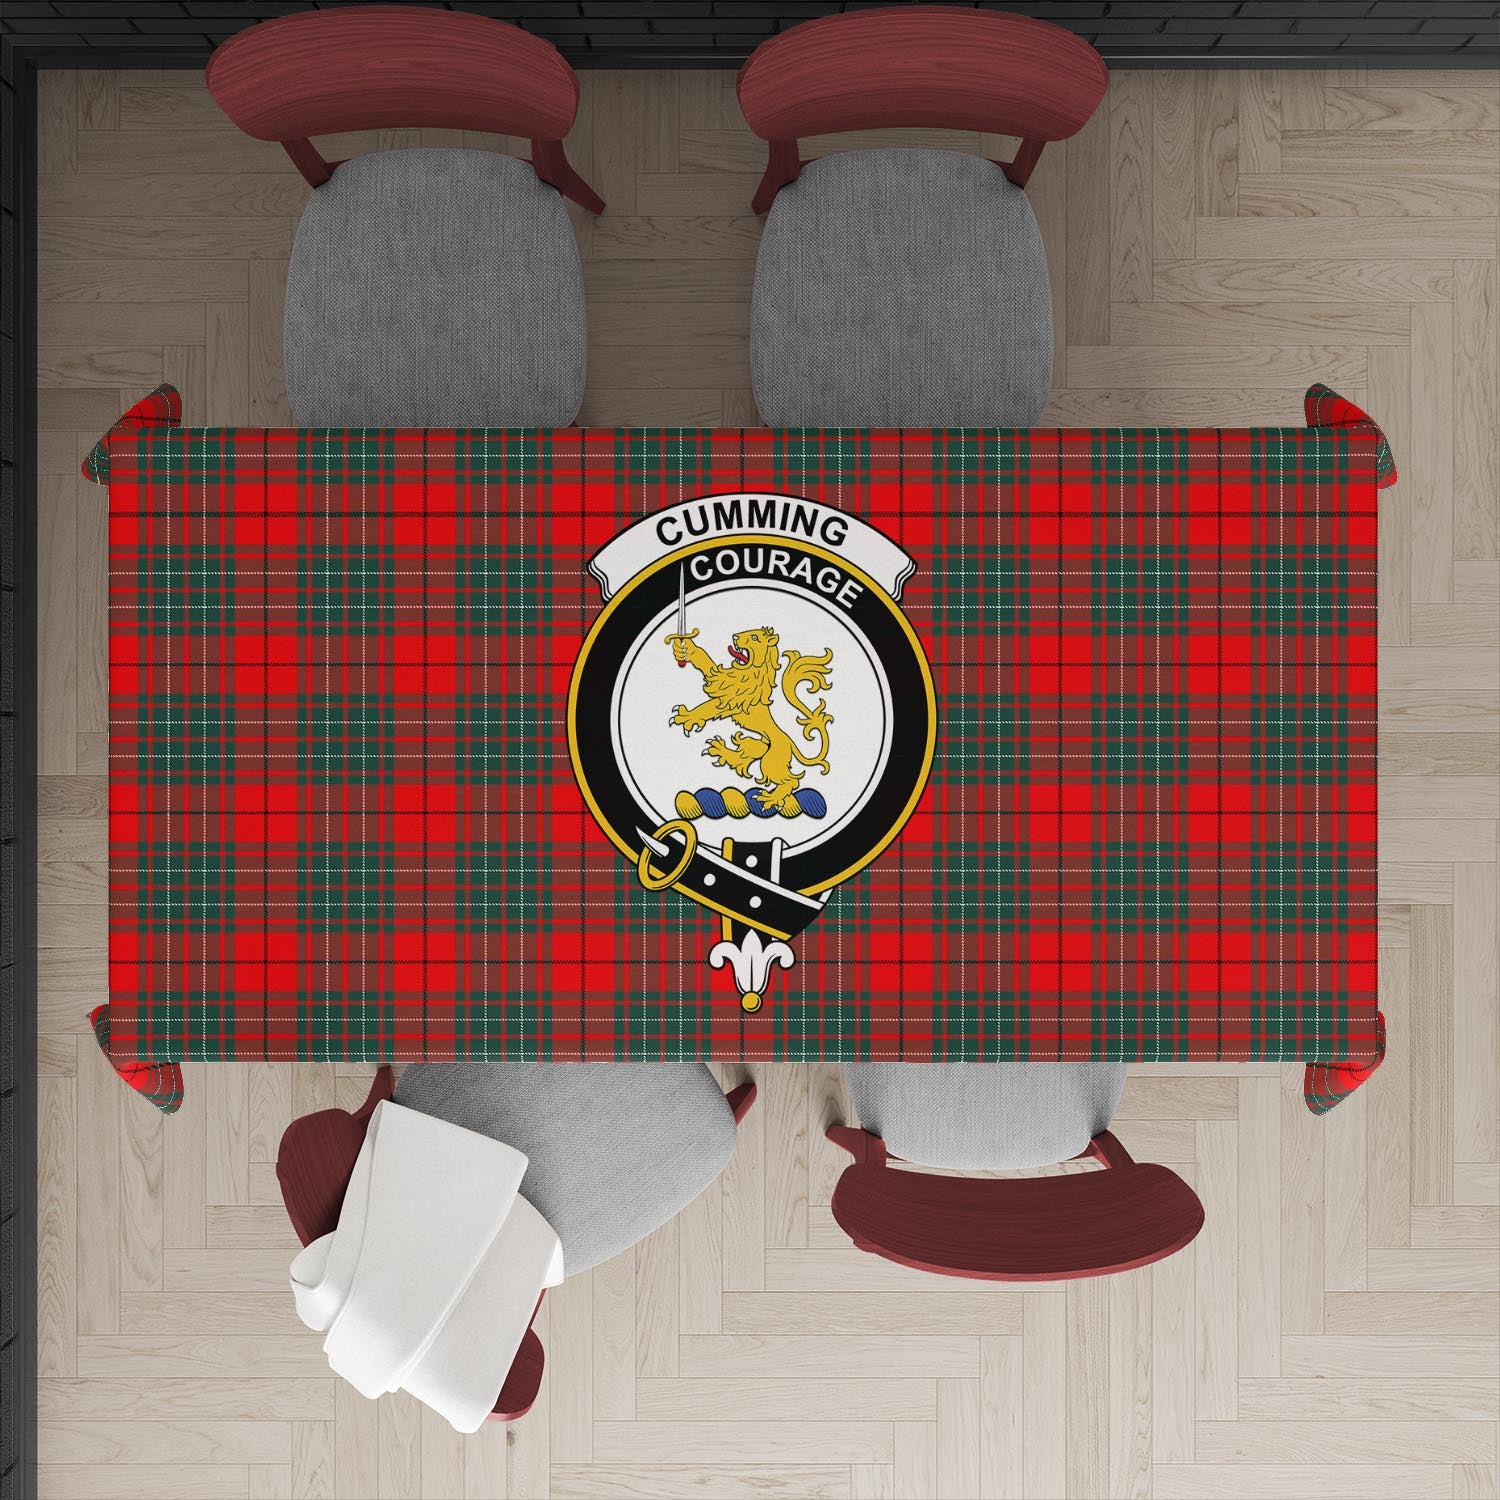 cumming-modern-tatan-tablecloth-with-family-crest